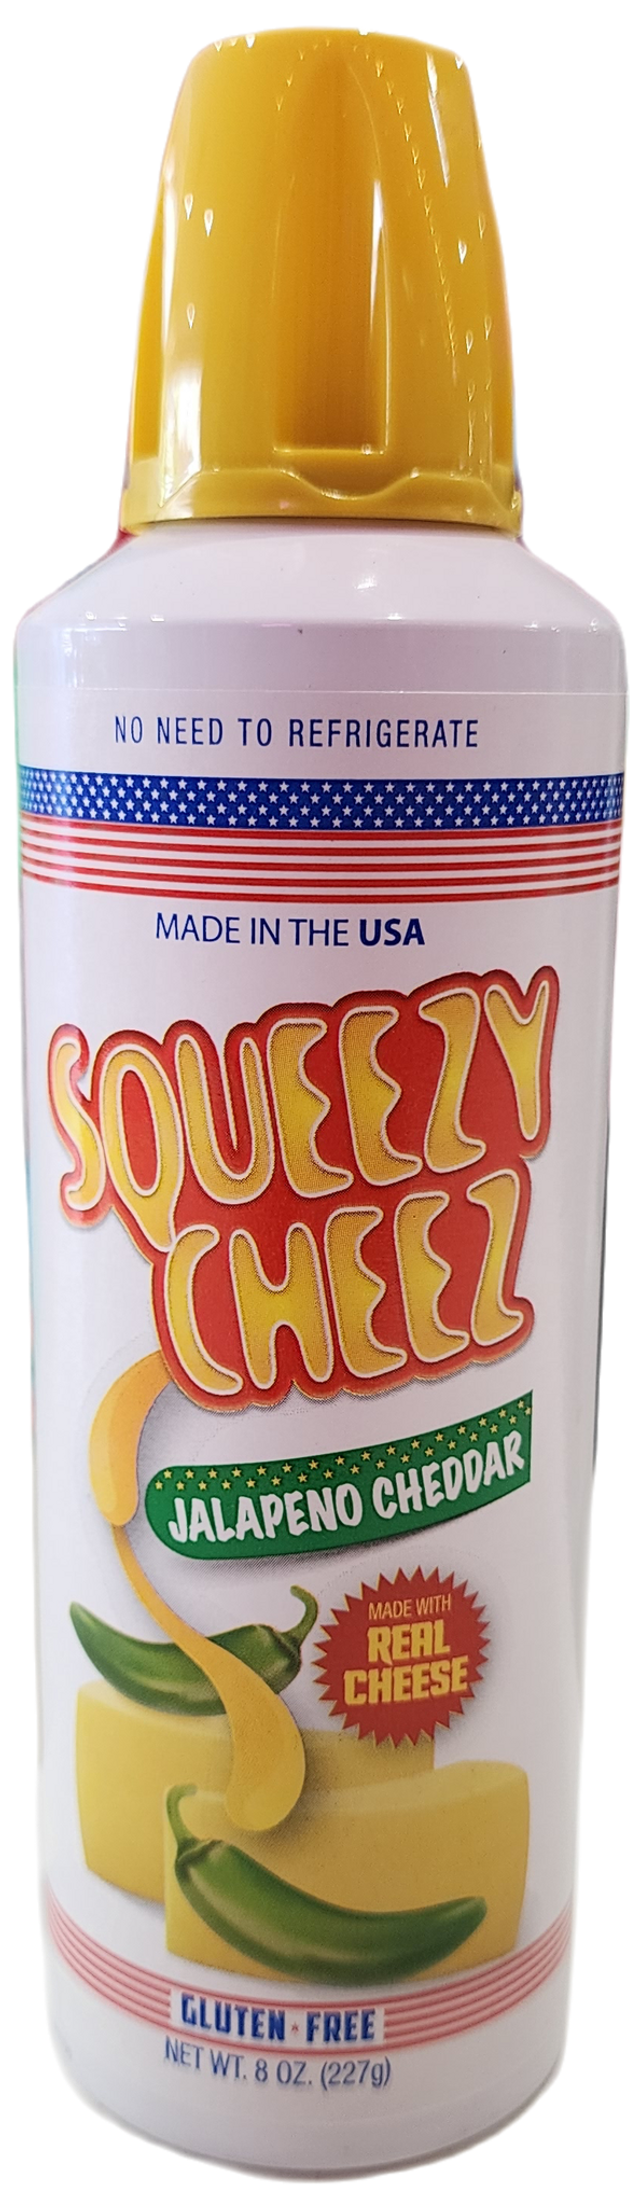 Squeezy Cheez Jalapeno Cheddar - 227g